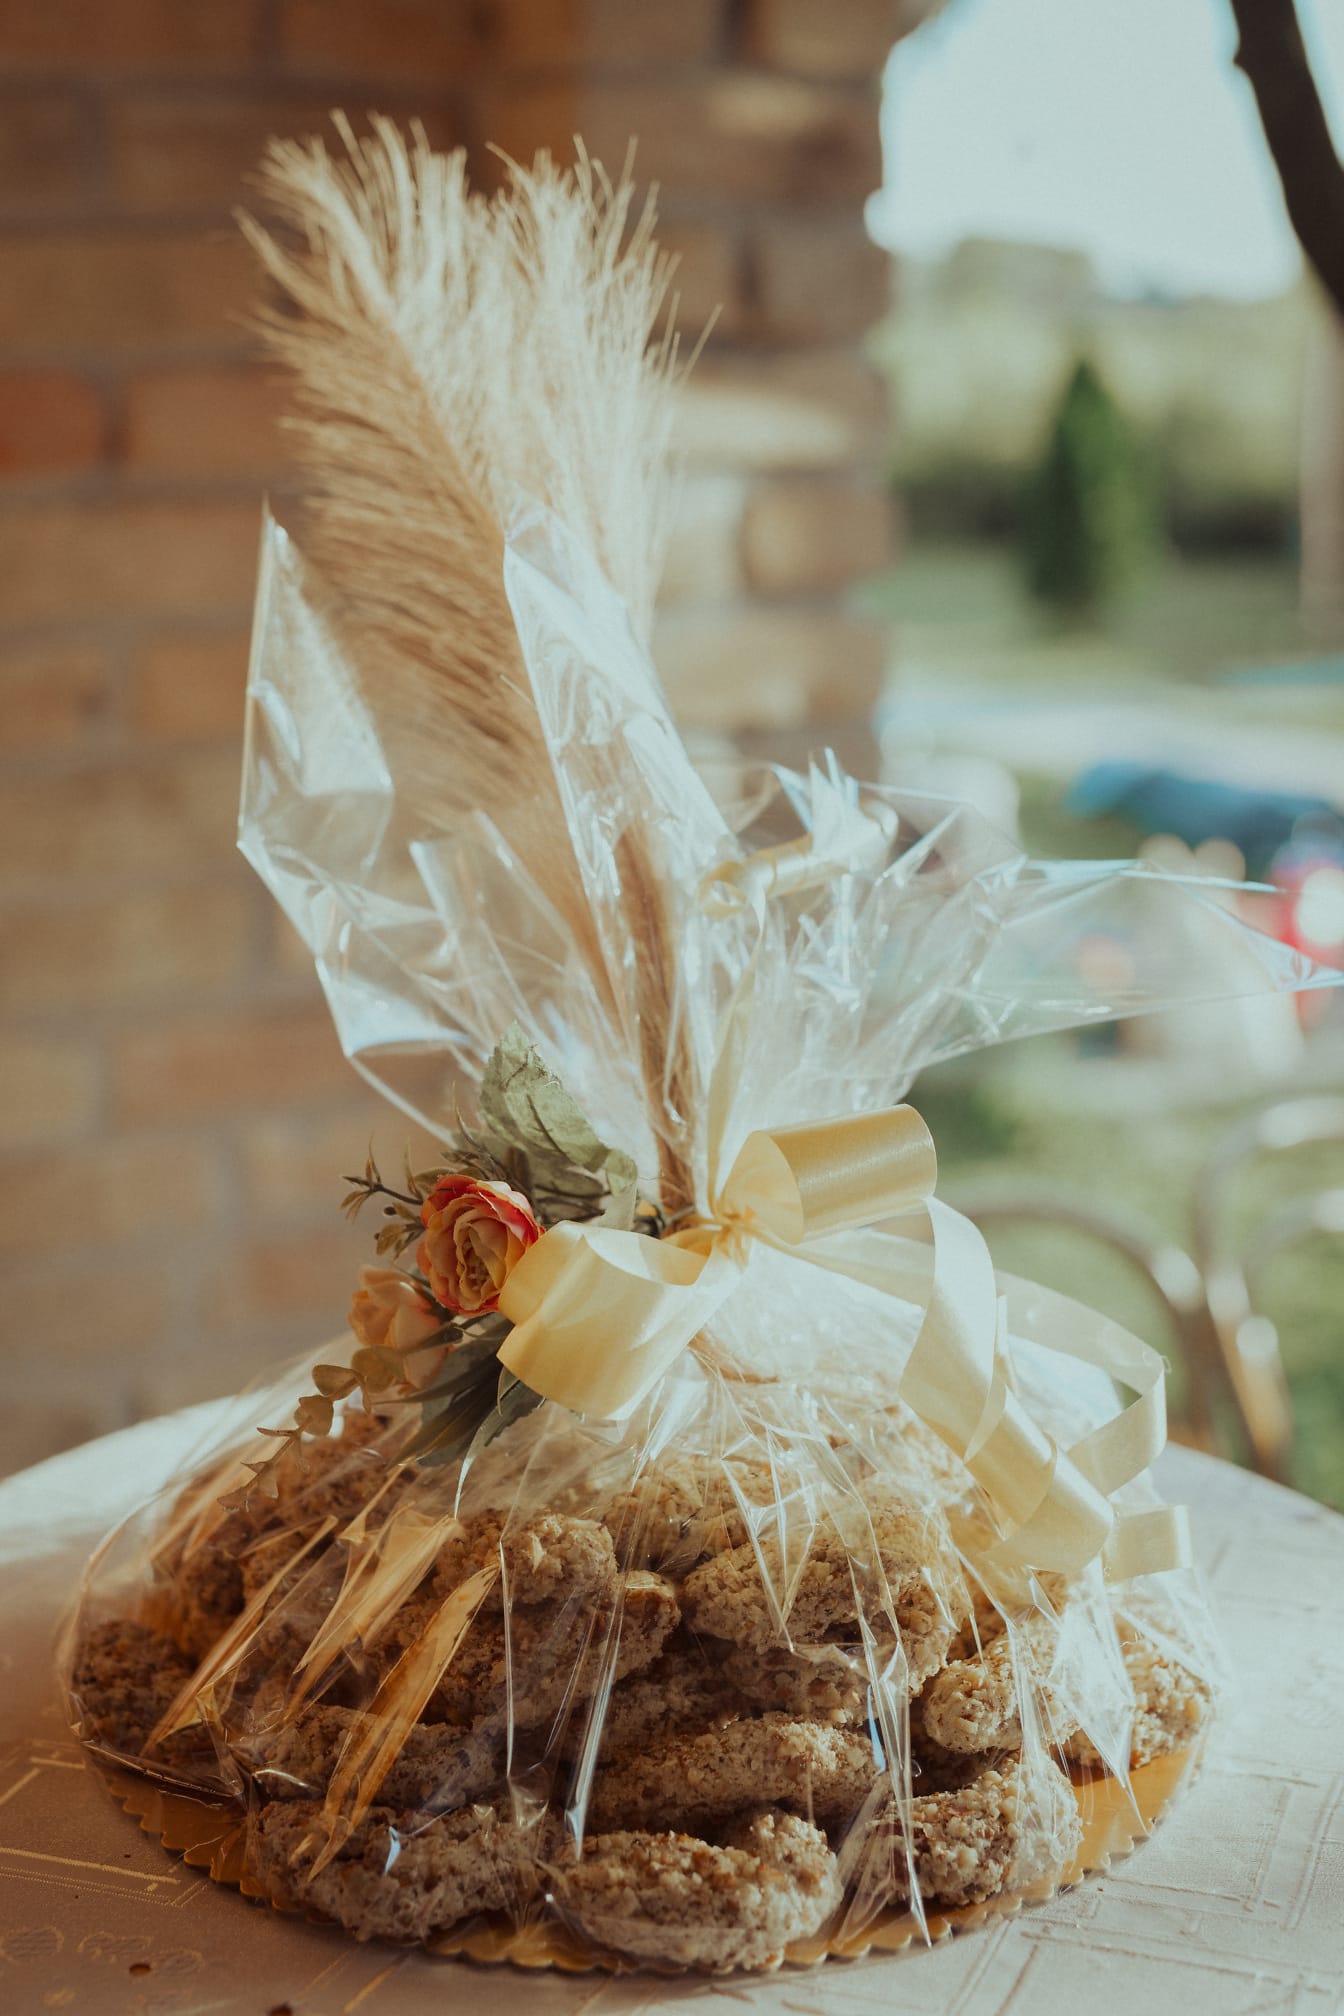 Handmade biscuits in decorative rustic package on table